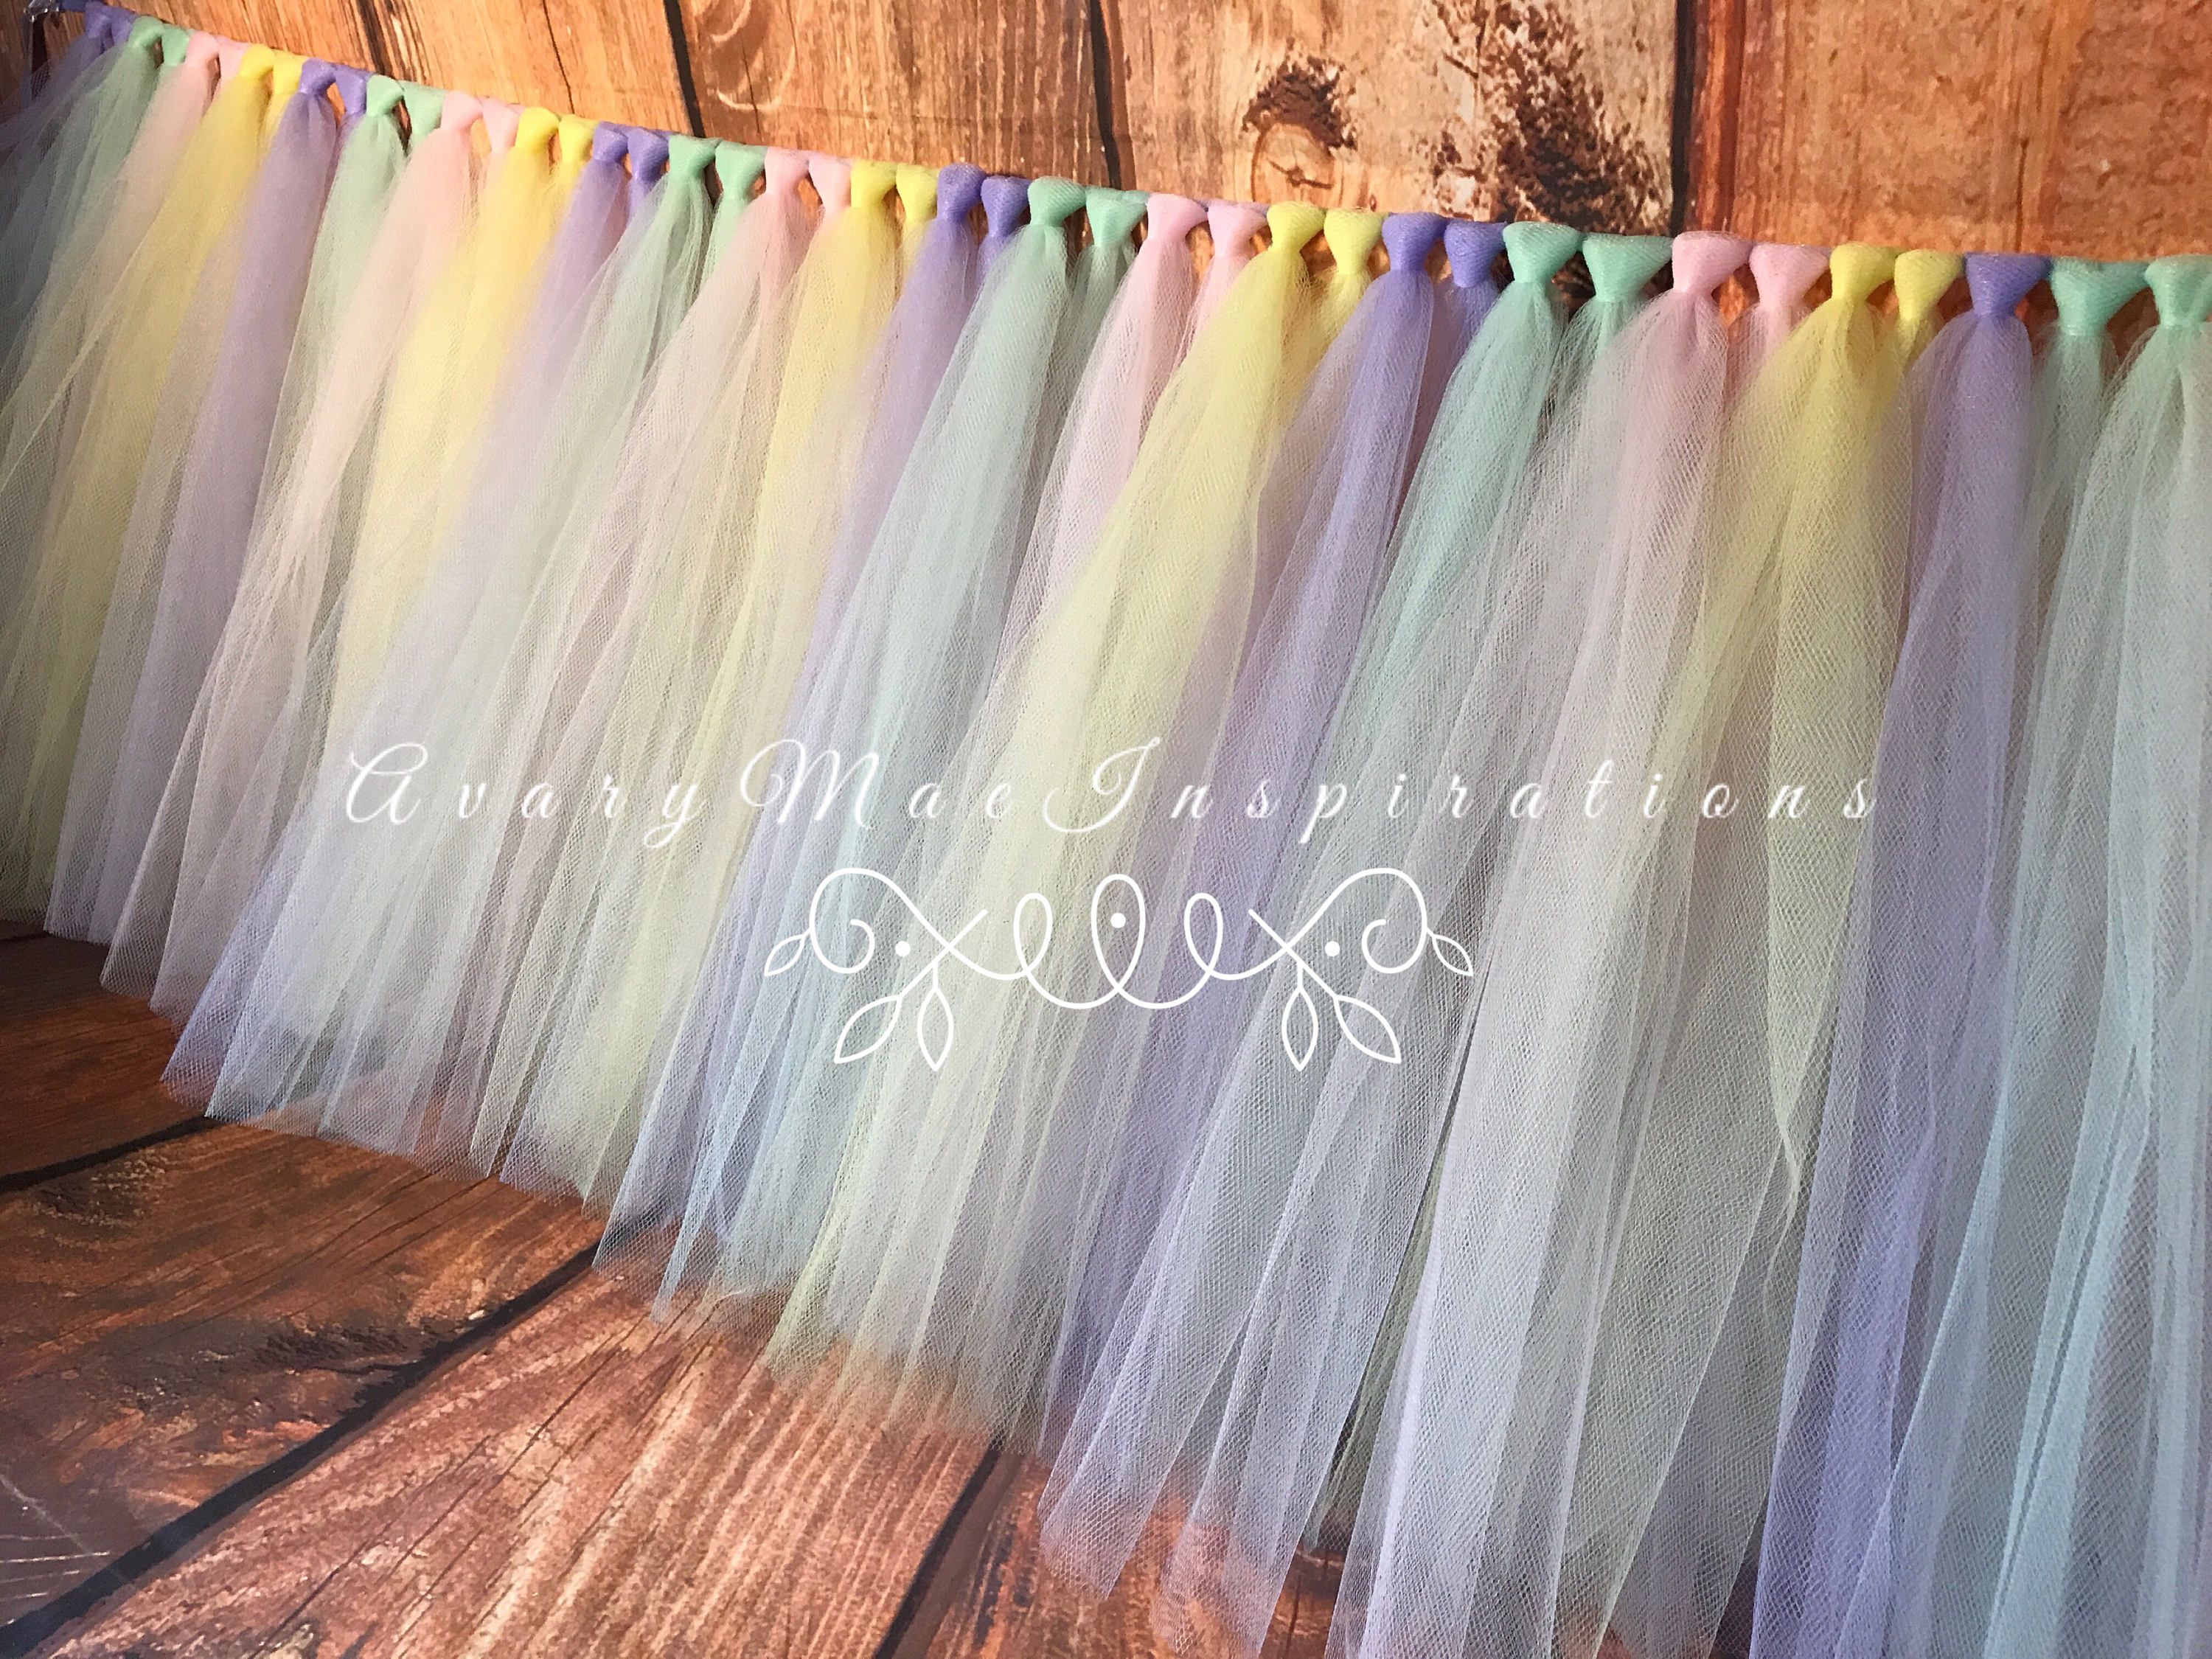 tulle table skirt tutu unicorn round accent skirts party will custom make any colors sizes narrow farmhouse dining farm style end tables lucite legs and bases lazy susan rustic